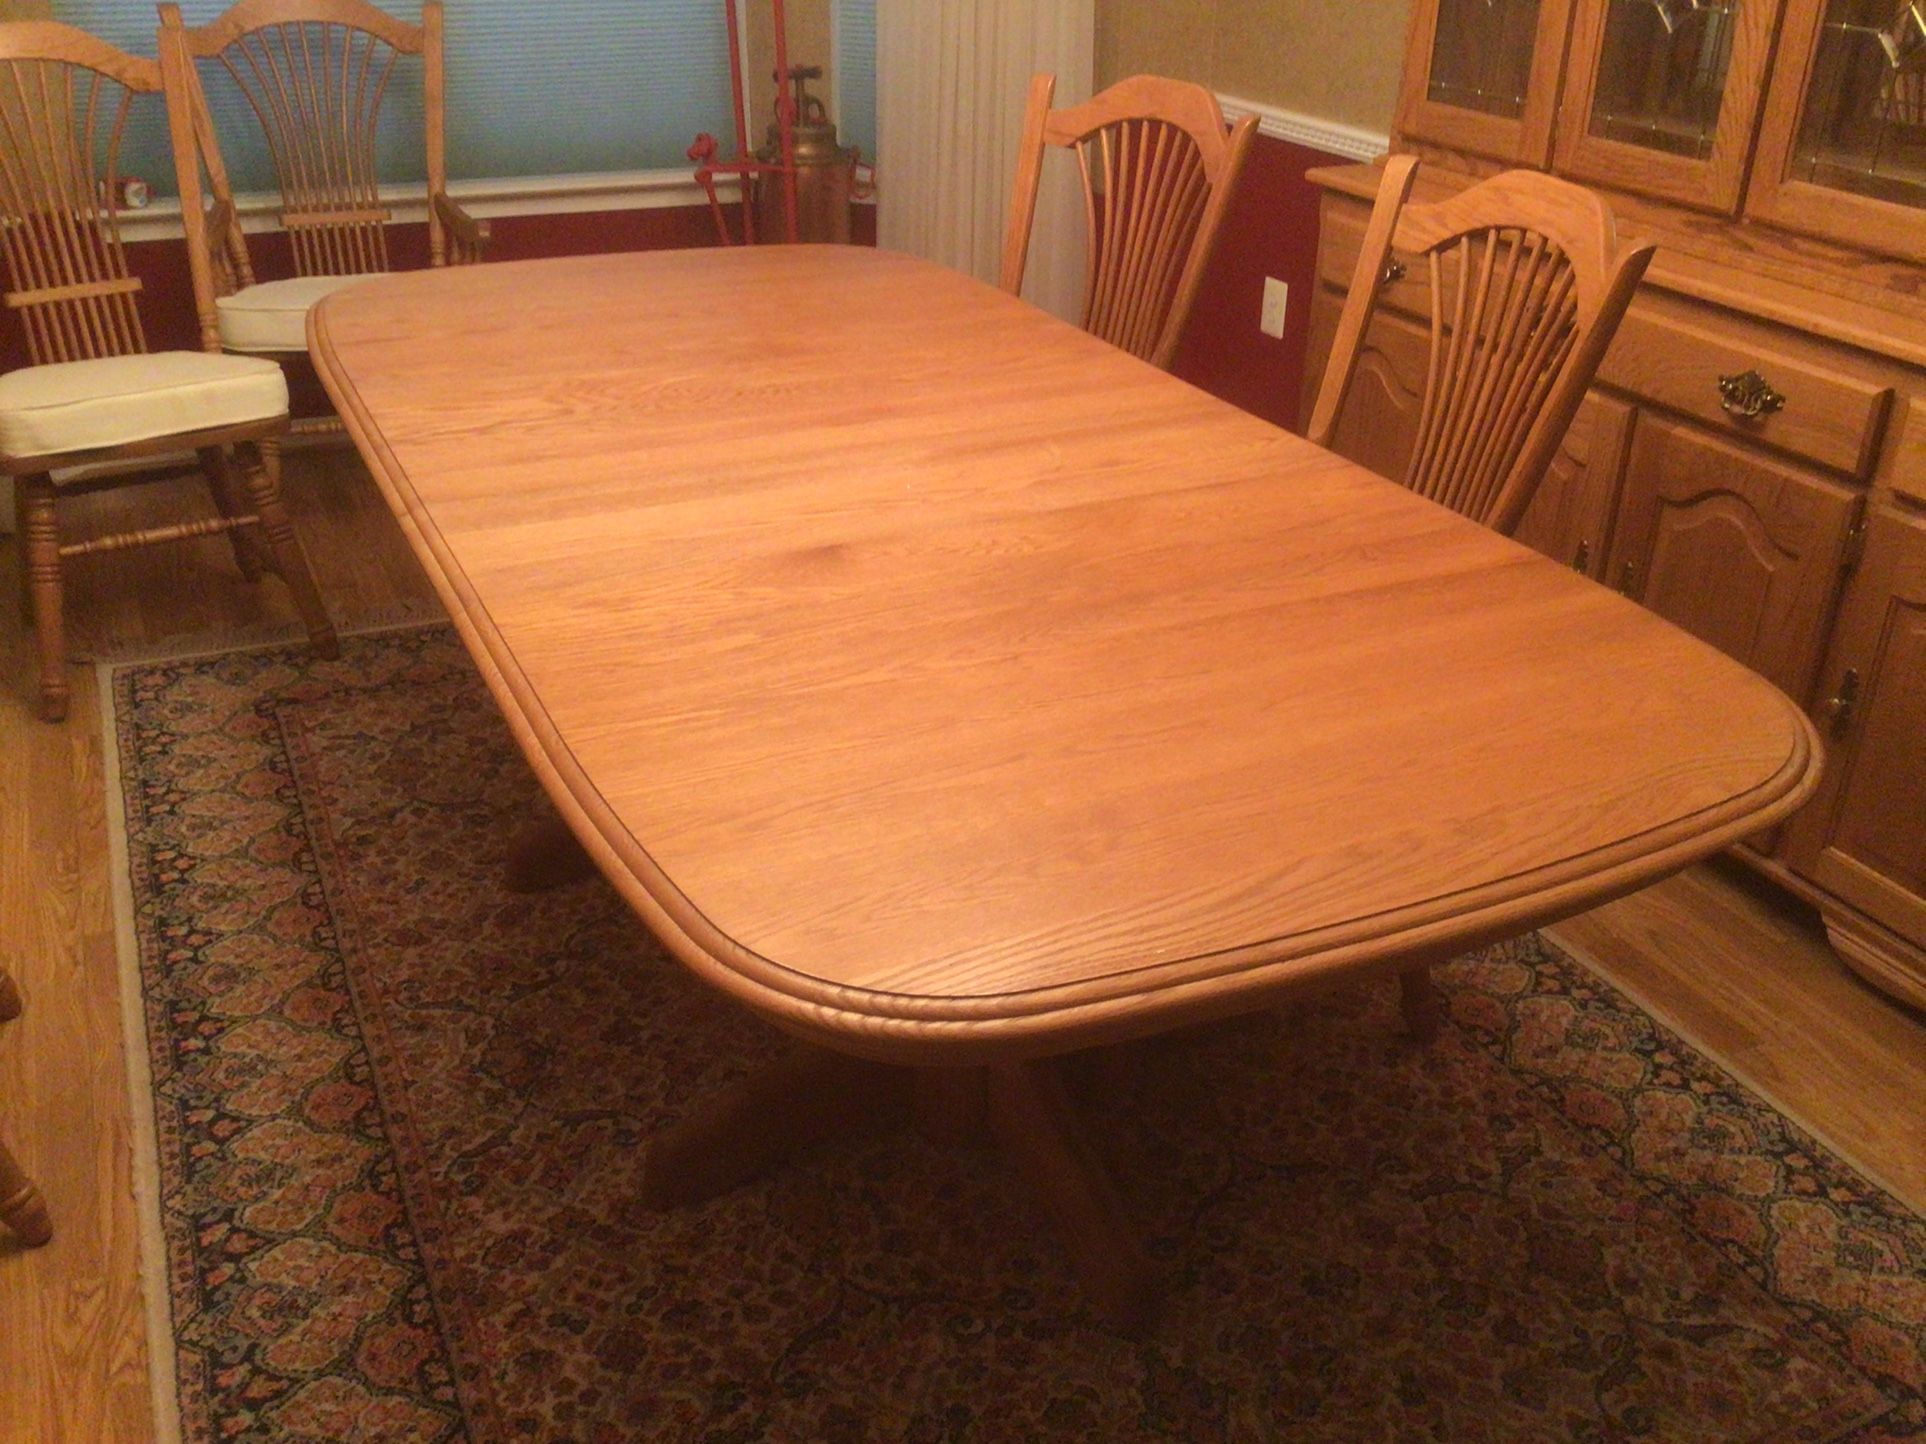 Messaging Not Working On This Ad…look For Reposted Version….Solid Oak Dining Room Set